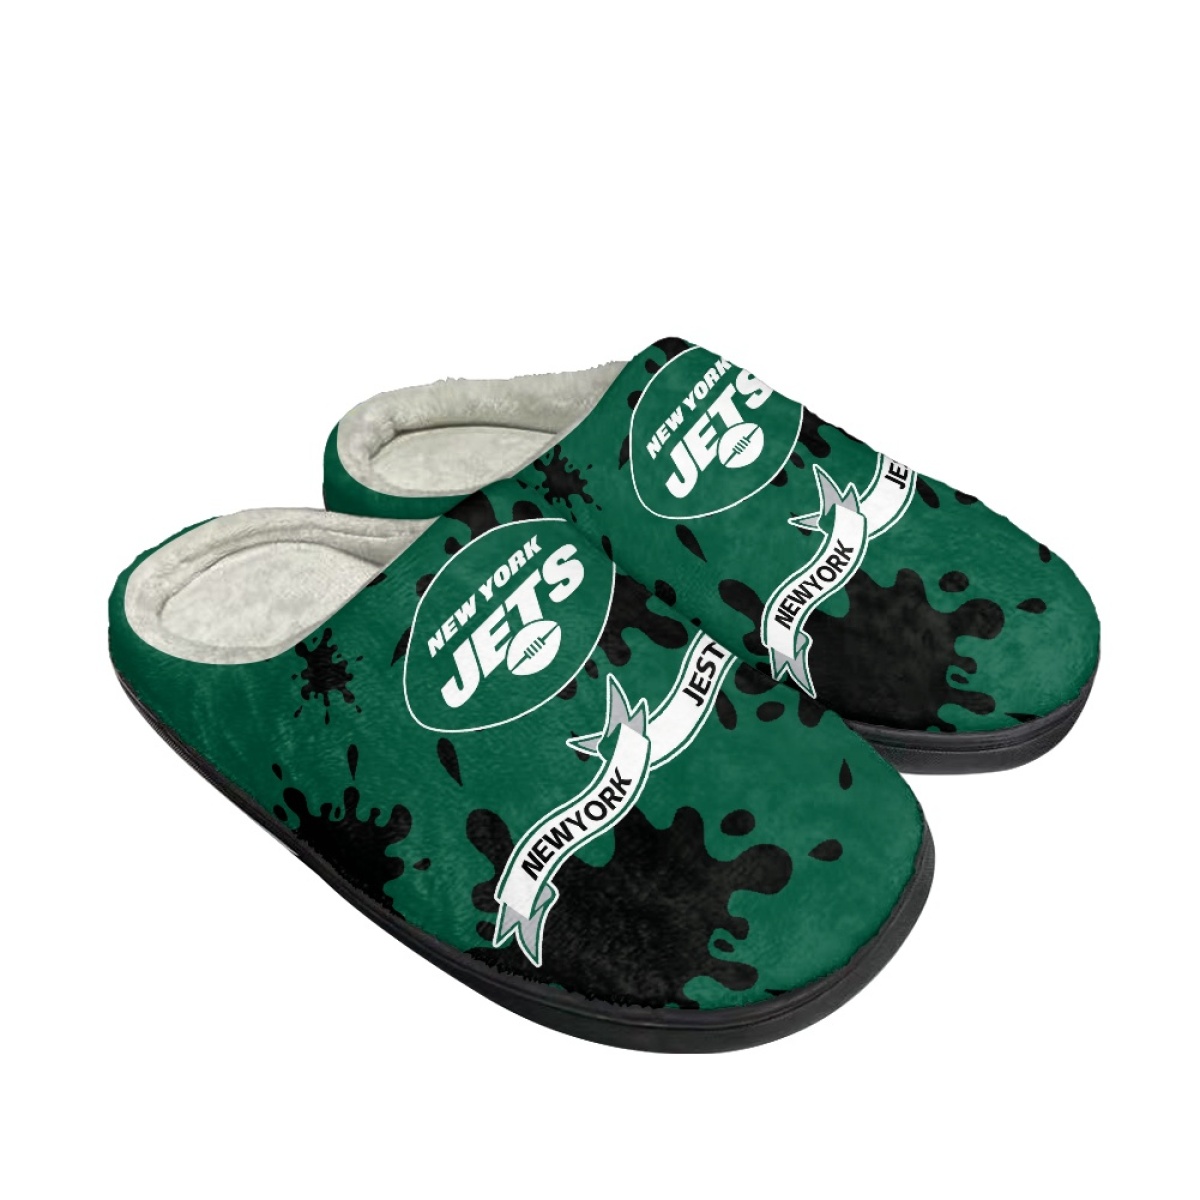 Men's New York Jets Slippers/Shoes 006